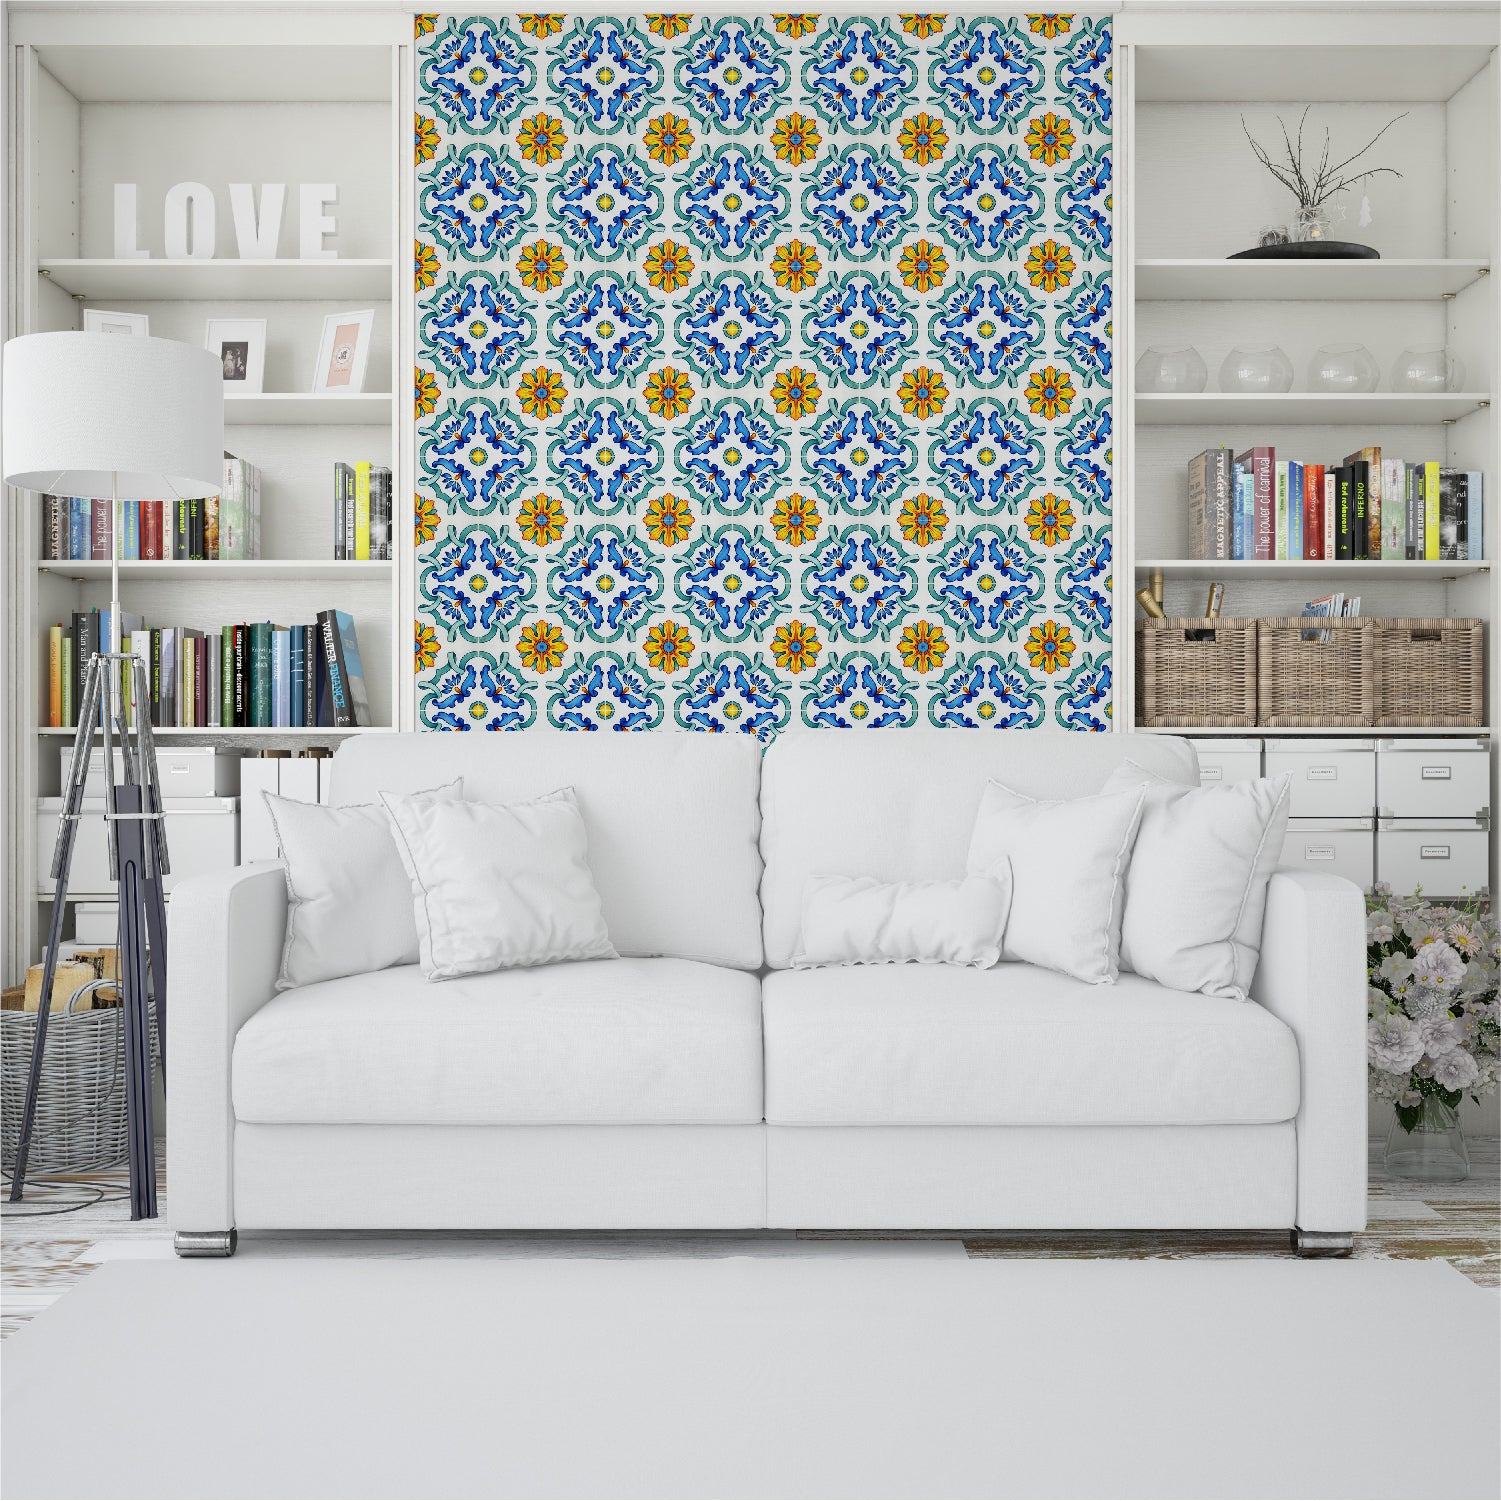 Tile Stickers Portuguese Style Tile Stickers - Mosaicowall Mosaicowall Portuguese Style Tile Stickers